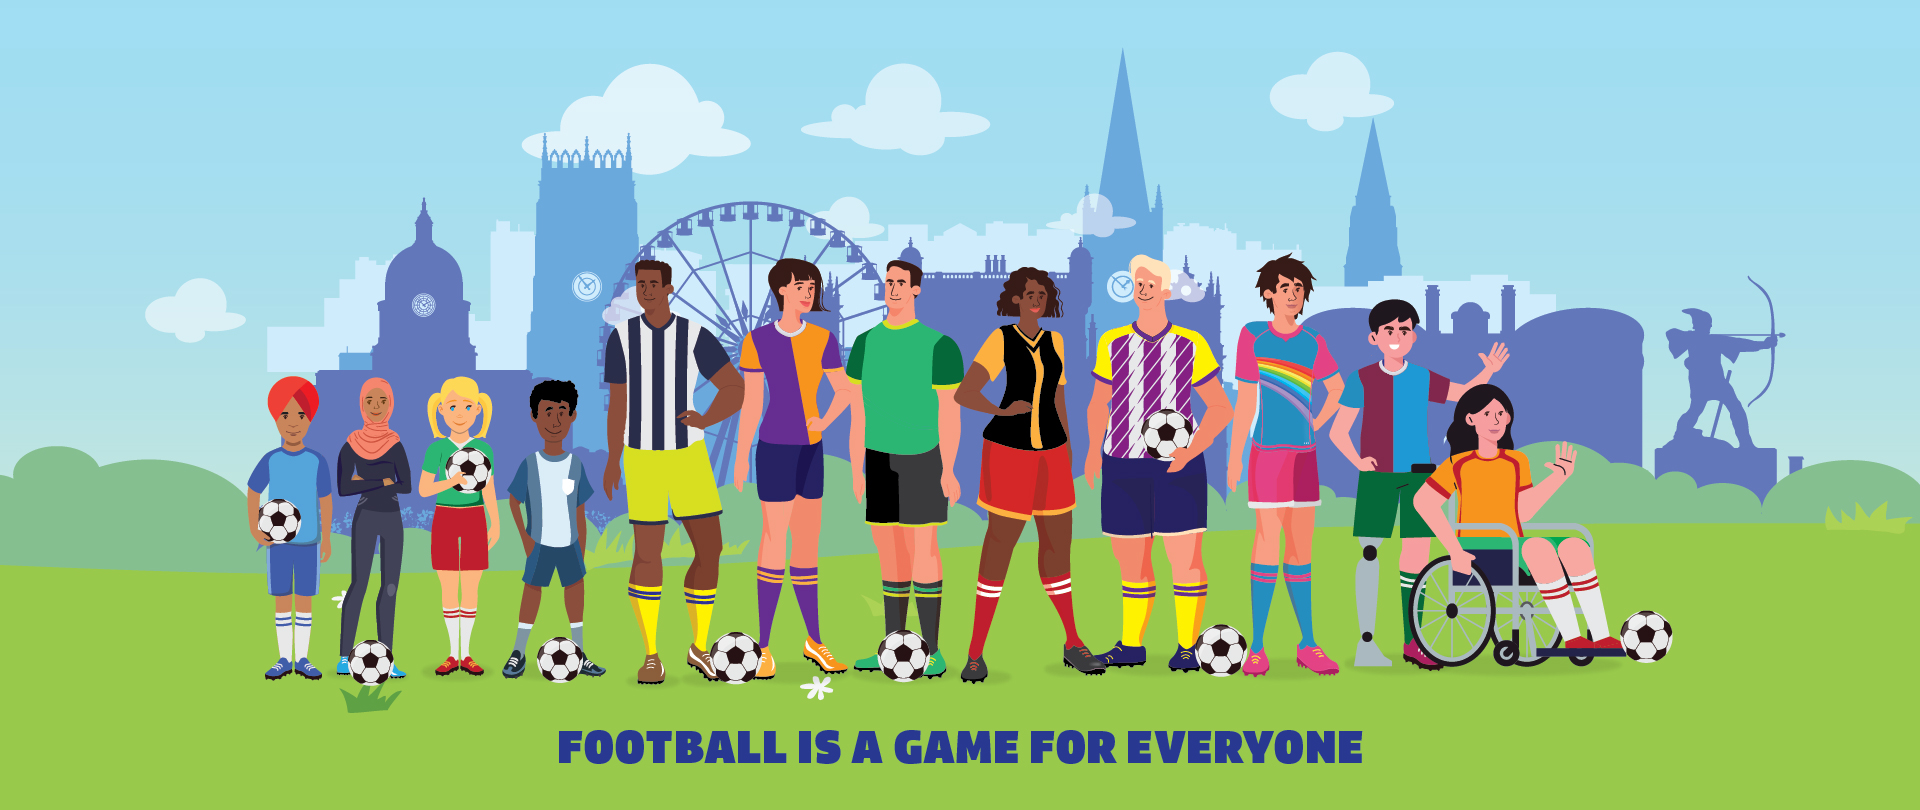 football is a game for everyone banner